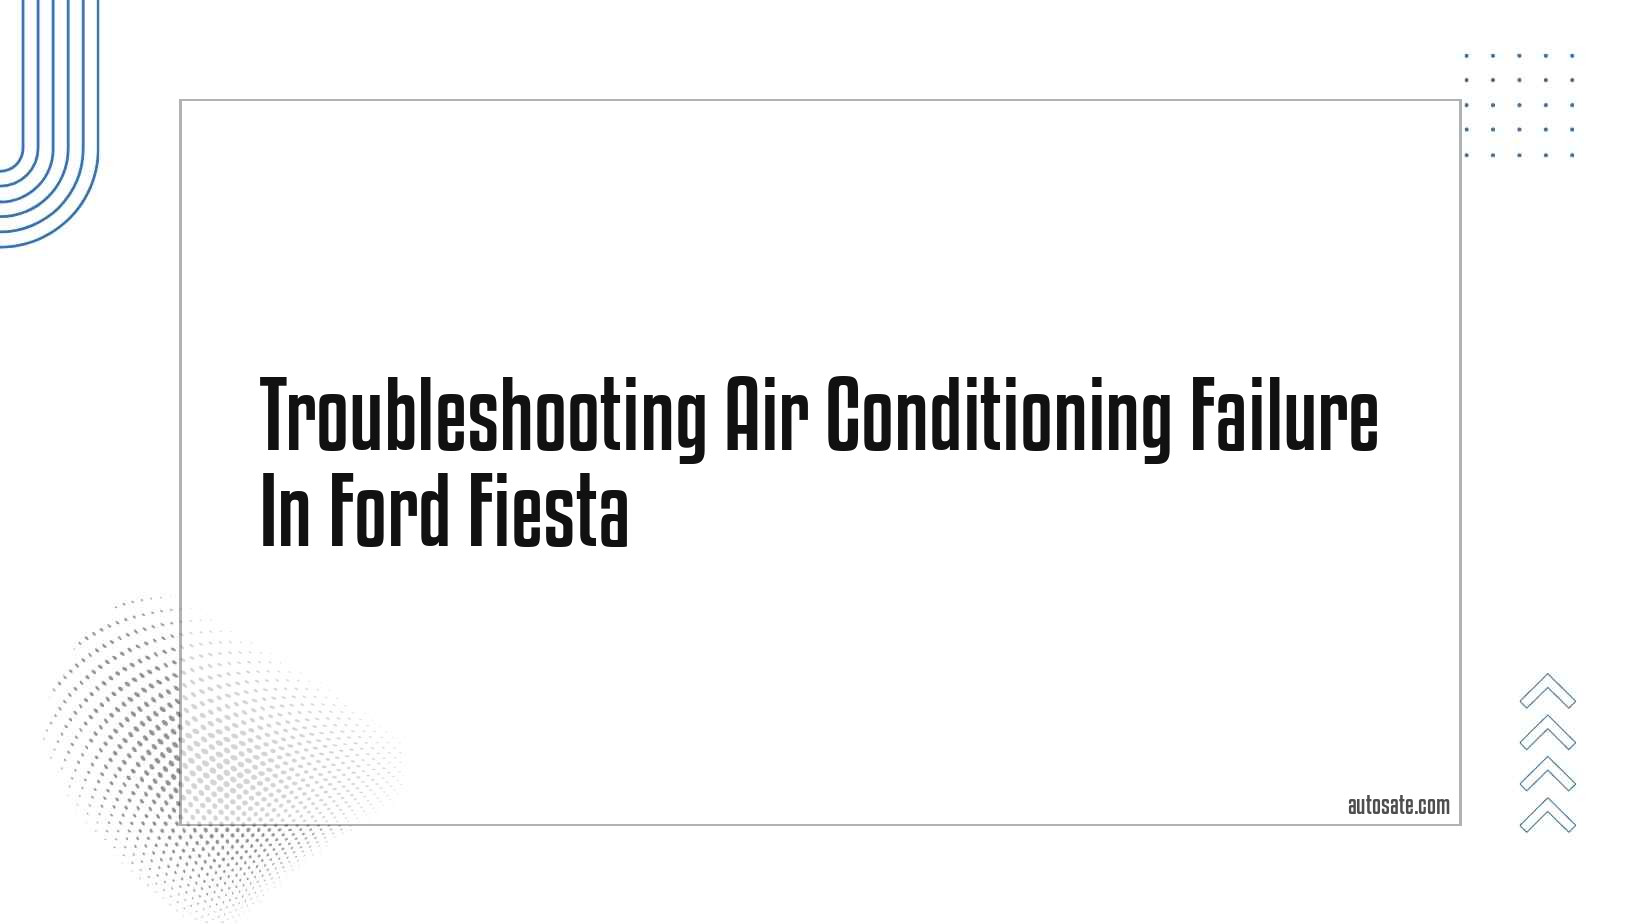 Troubleshooting Air Conditioning Failure In Ford Fiesta